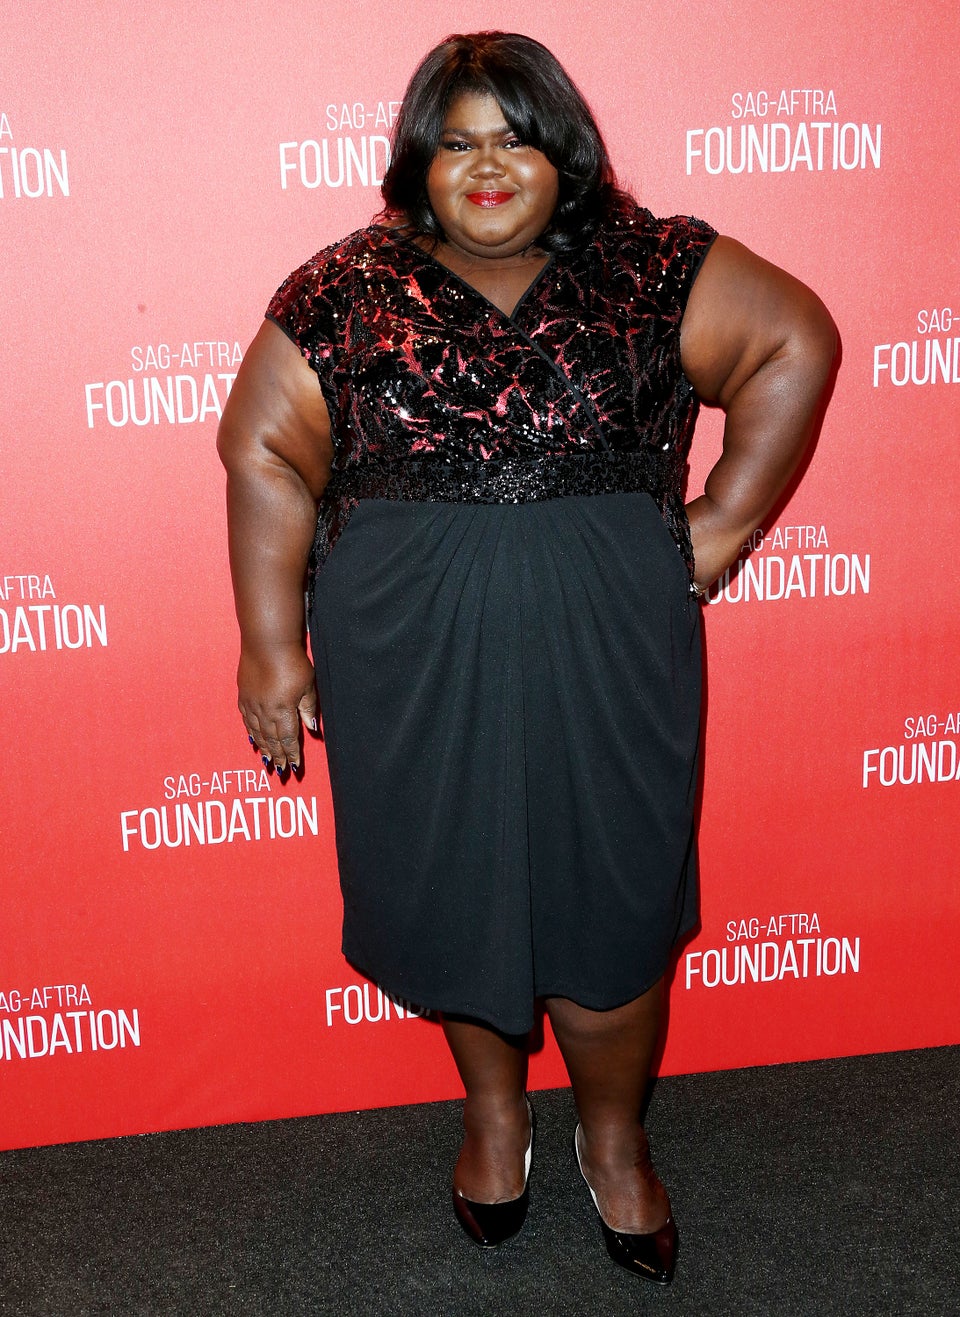 Gabourey Sidibe Responds to Fat-Shamers: “I’m Very Proud of the Work”